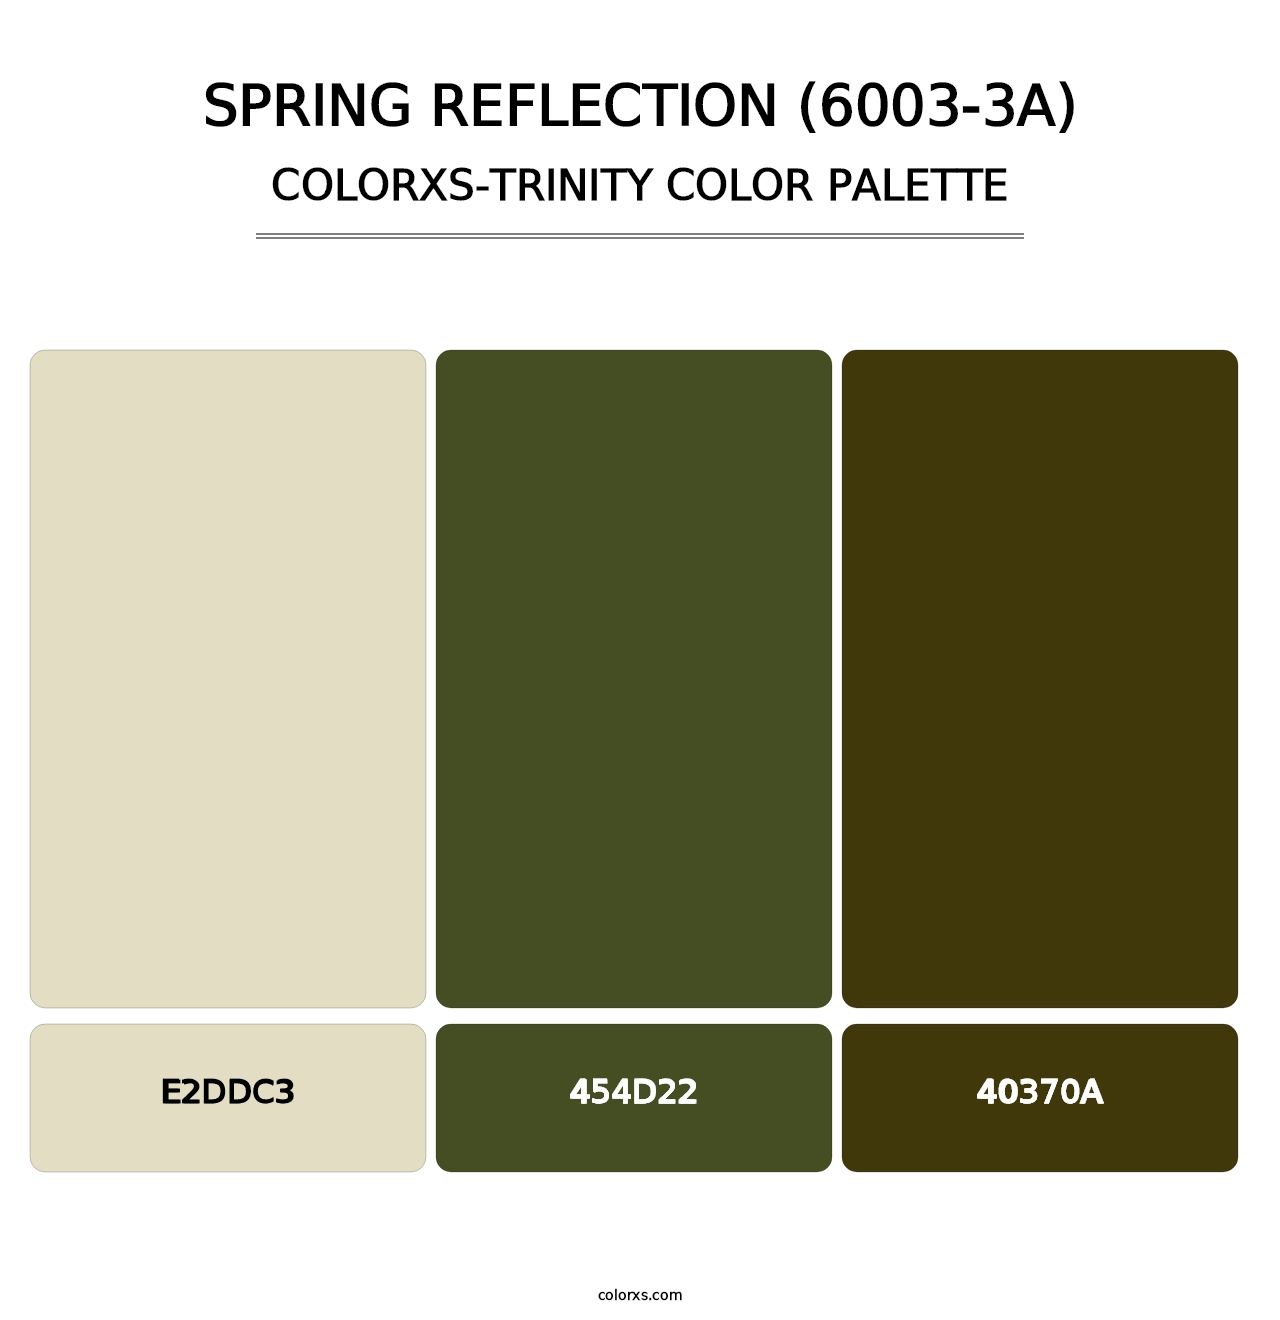 Spring Reflection (6003-3A) - Colorxs Trinity Palette